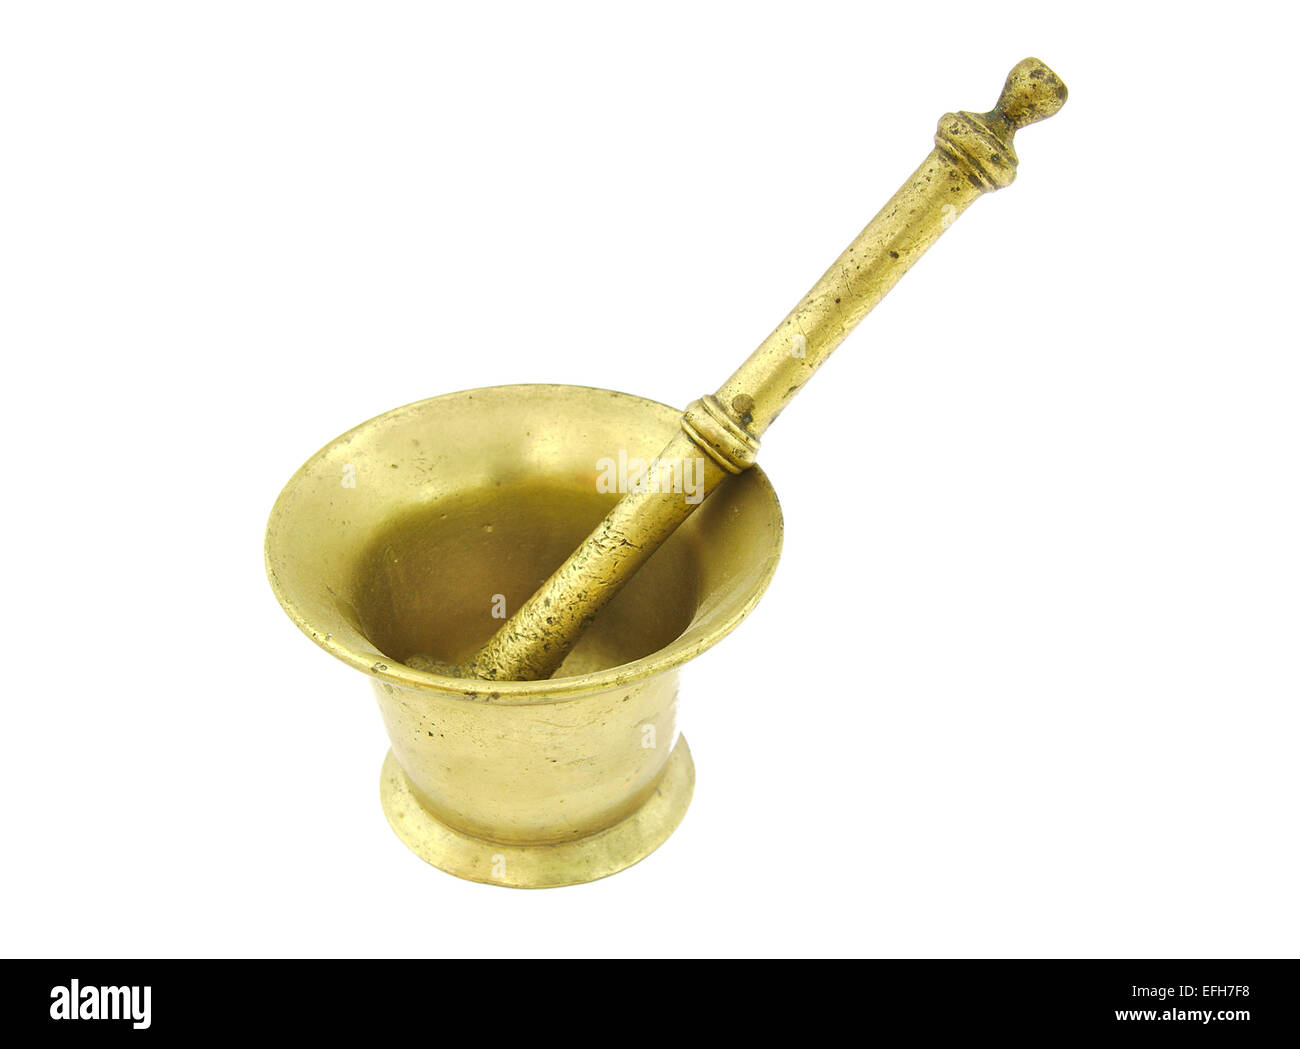 Old bronze mortar and pestle isolated on white background Stock Photo